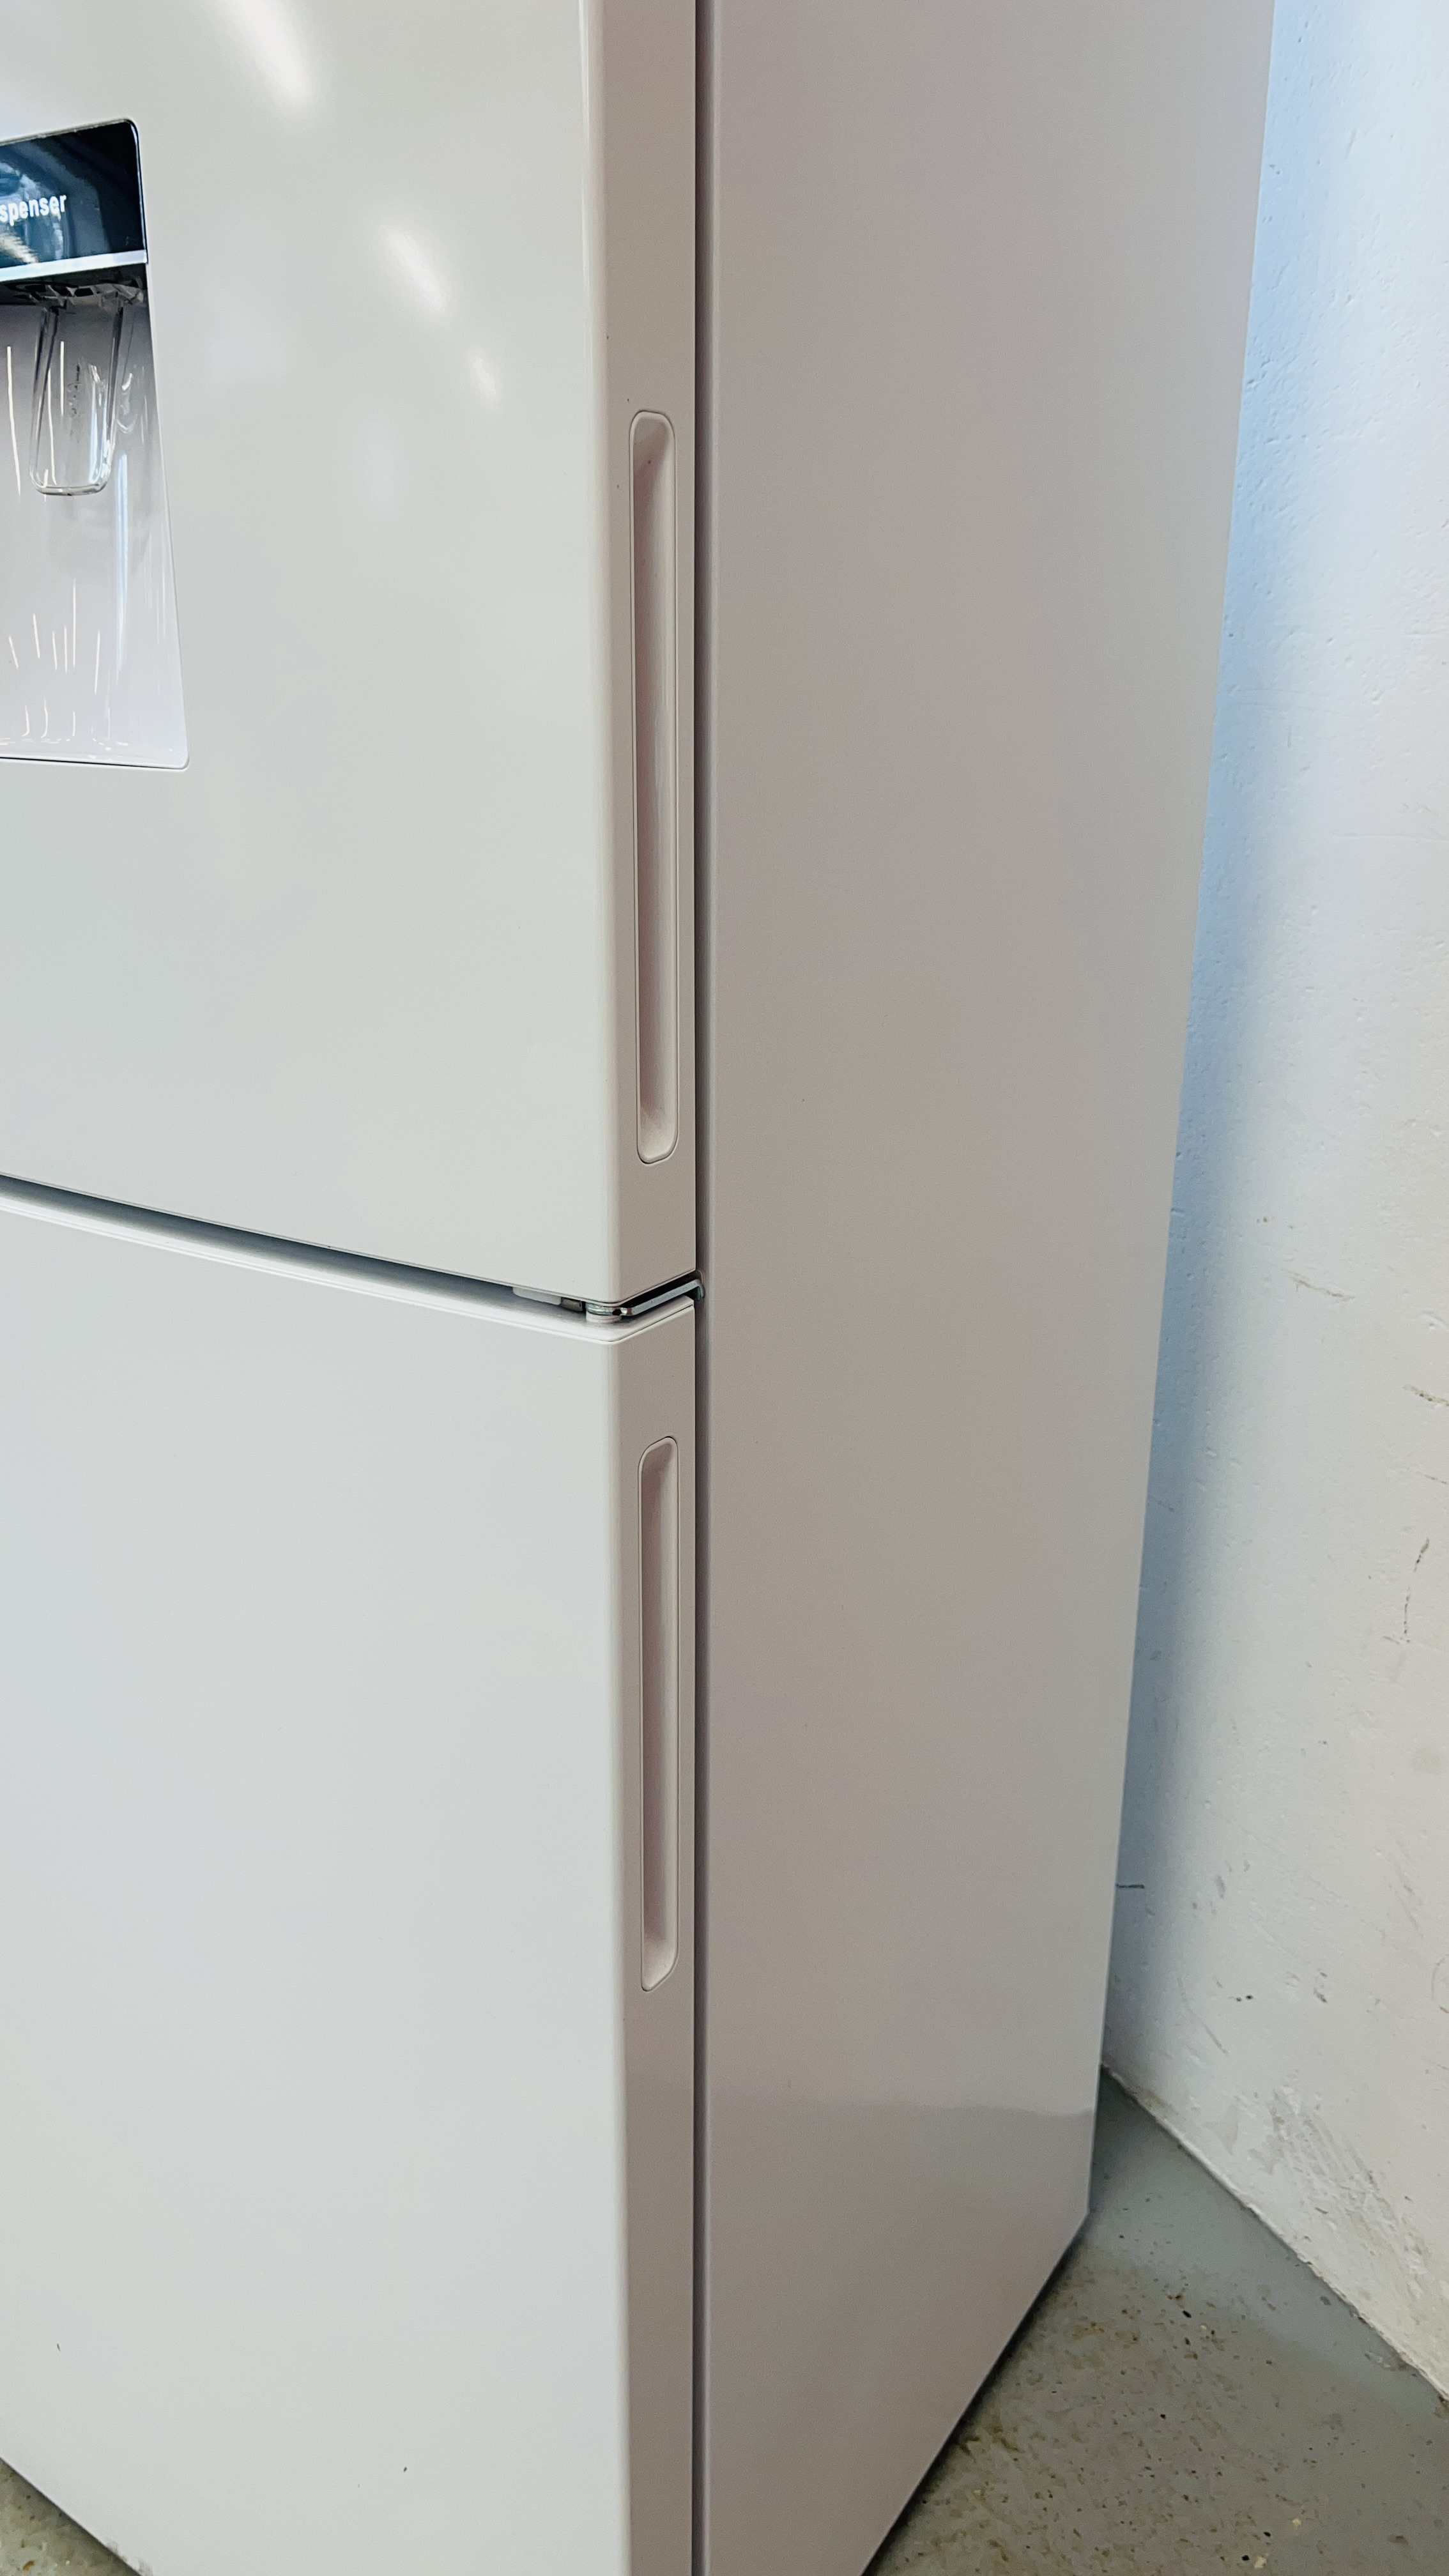 KENWOOD FROST FREE FRIDGE FREEZER WITH WATER DISPENSER - SOLD AS SEEN. - Image 7 of 11